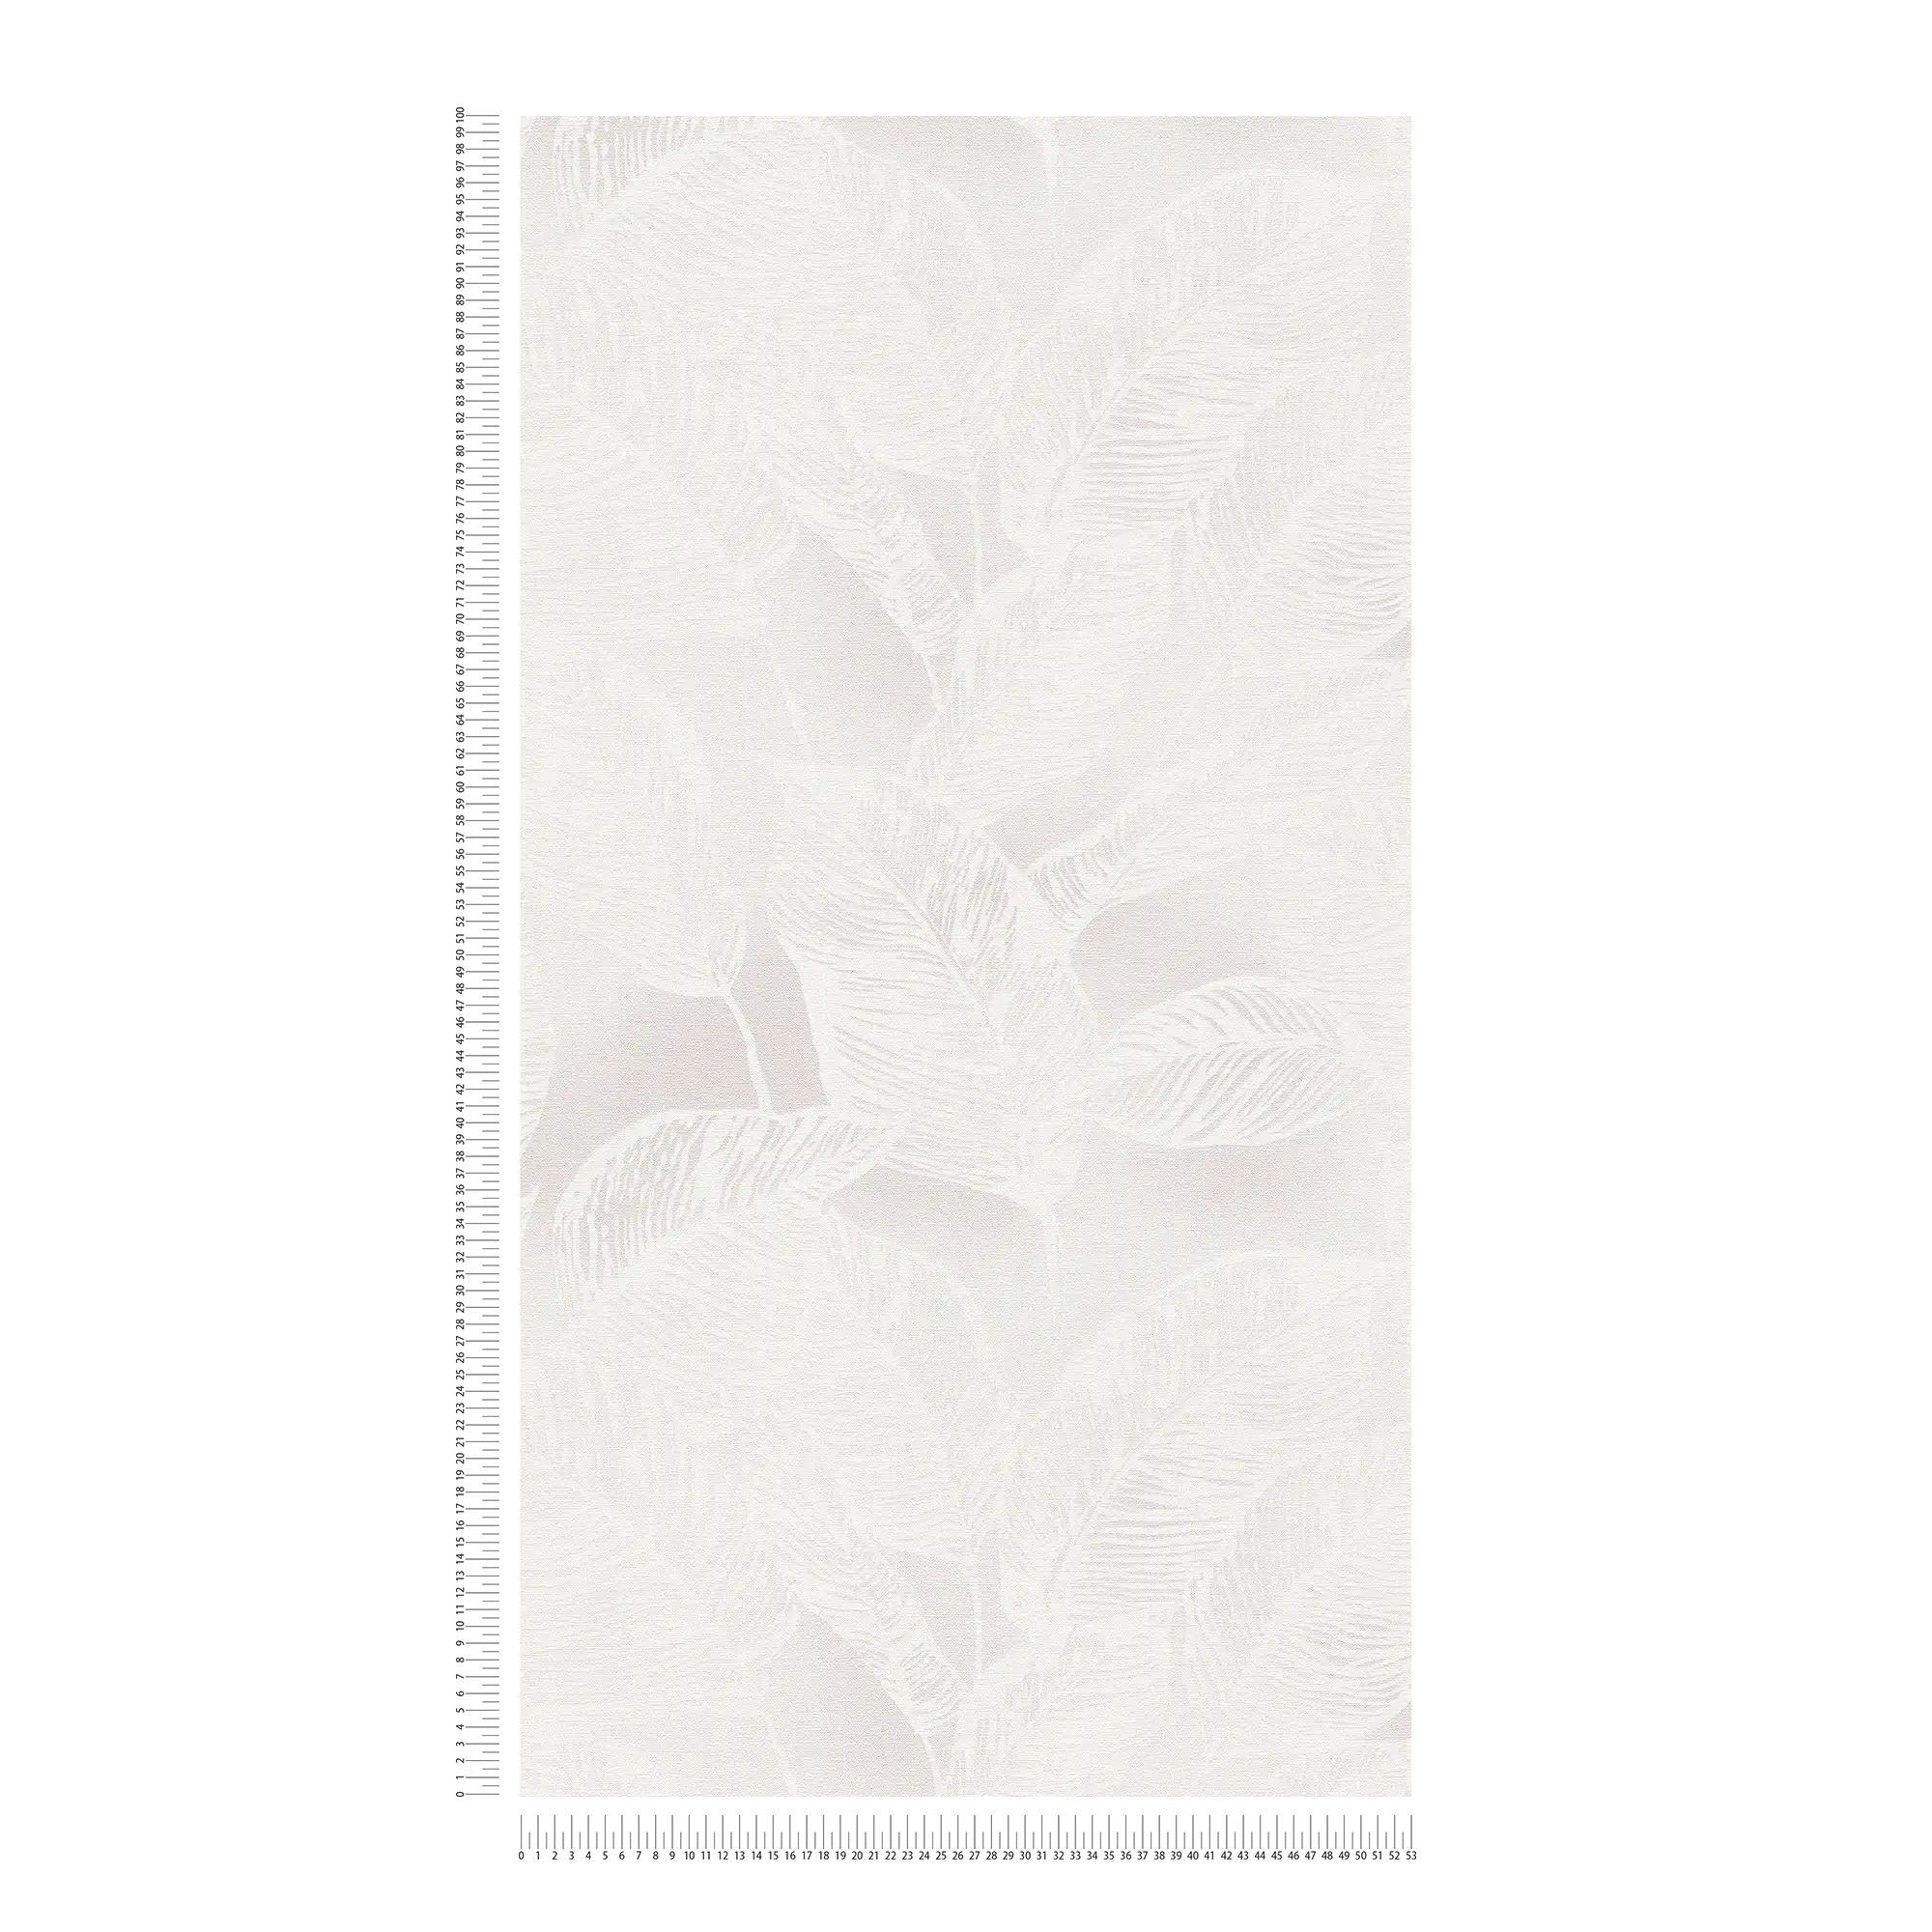             Non-woven wallpaper with leaves PVC-free - white, grey
        